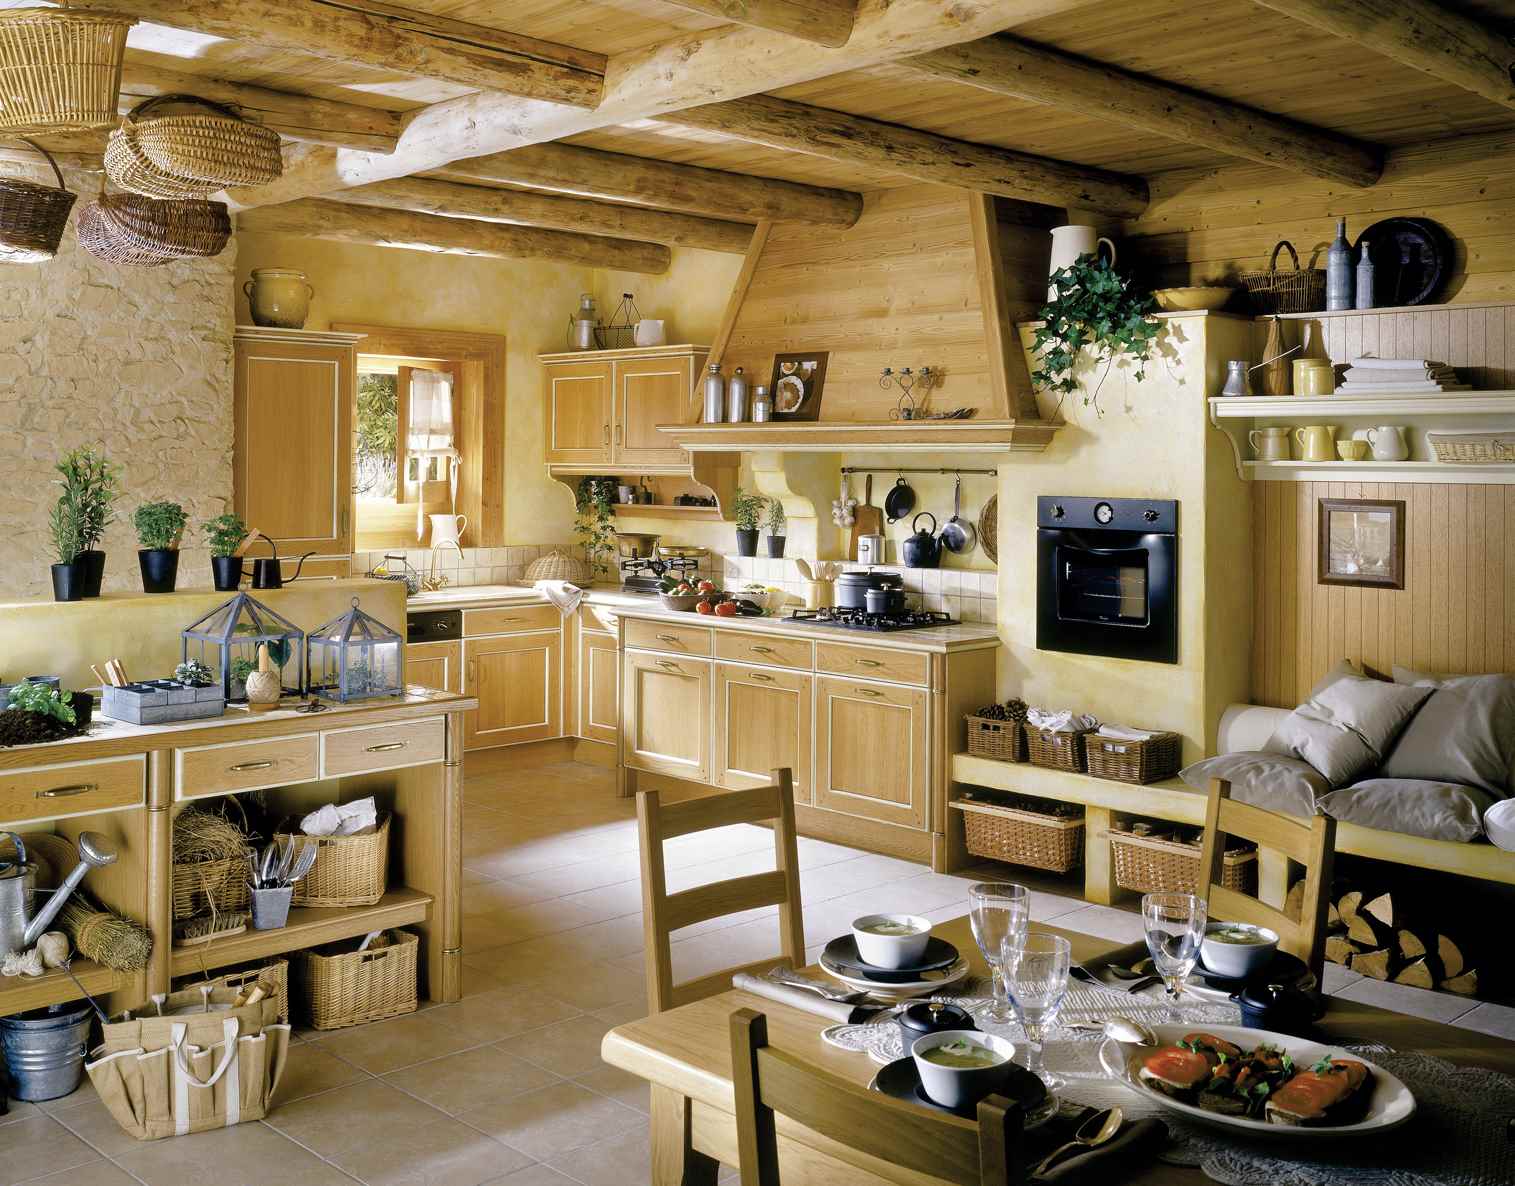 variant of a bright kitchen design in a wooden house